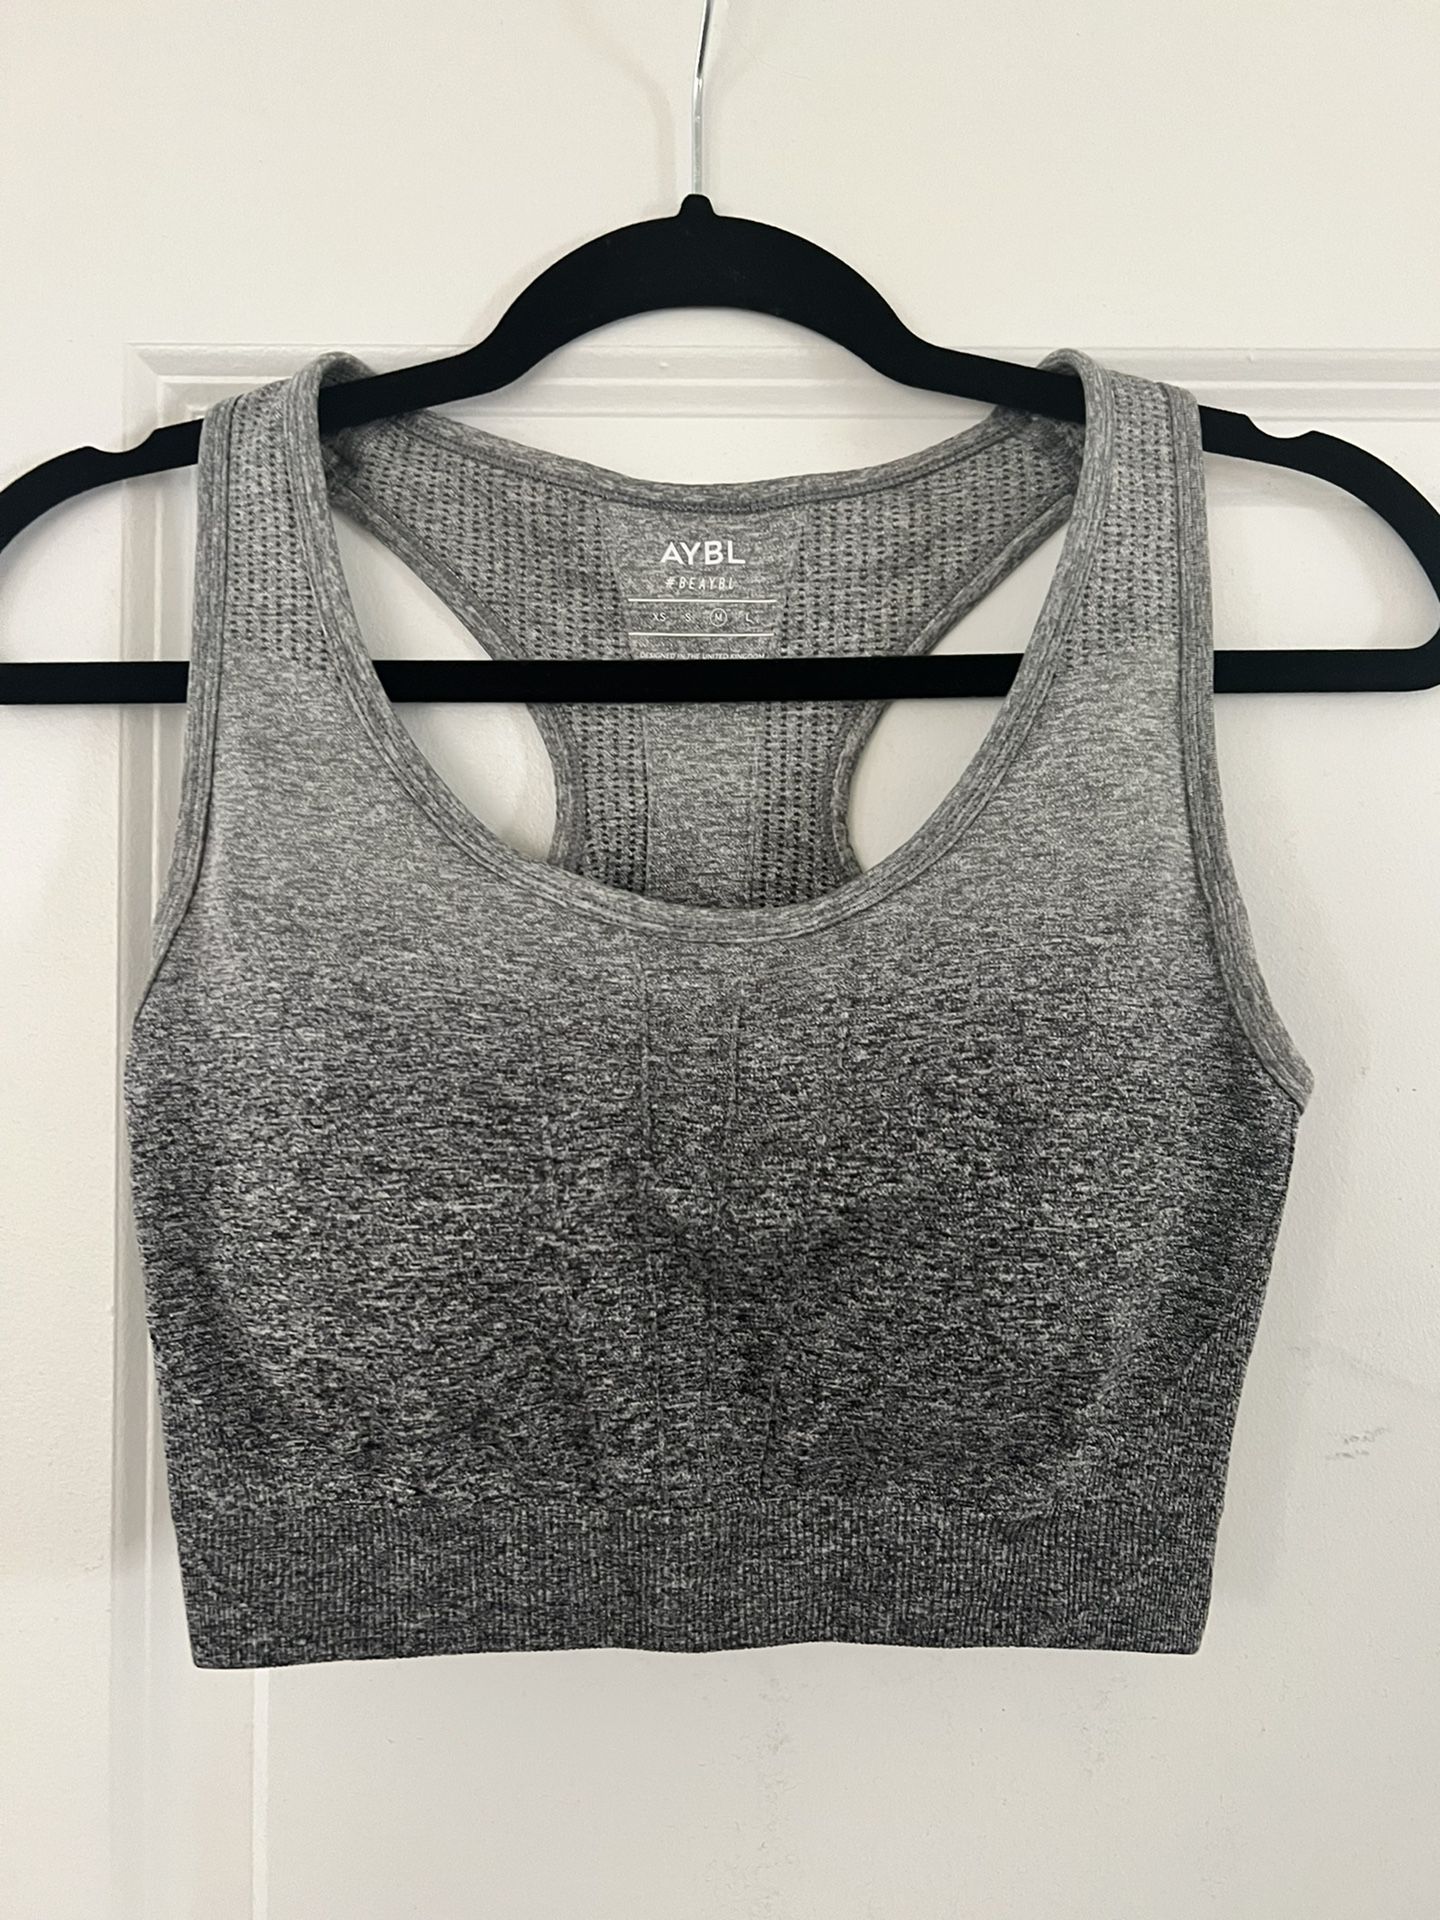 Sport Bras for Sale in Indianapolis, IN - OfferUp